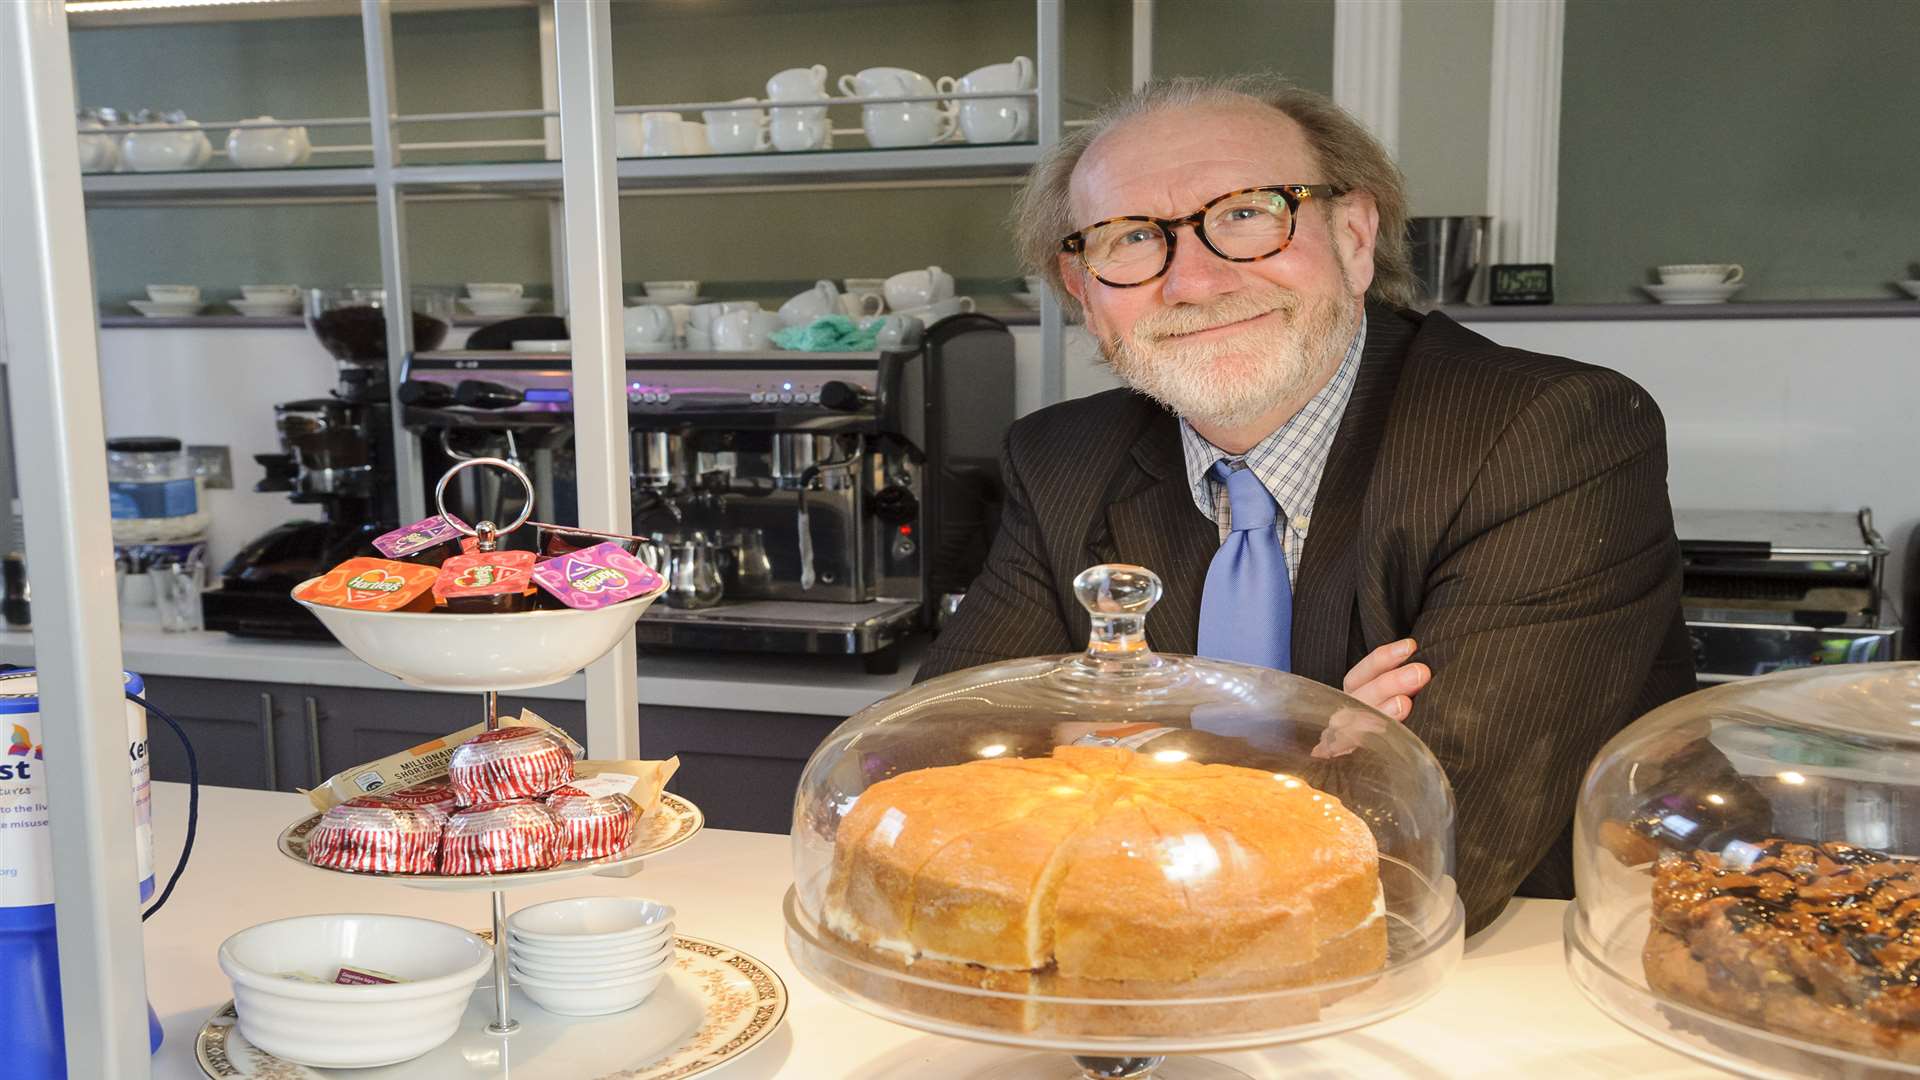 David Philpott, pictured at the opening of a cafe for the Kenward Trust, has stepped down as chairman of CXK